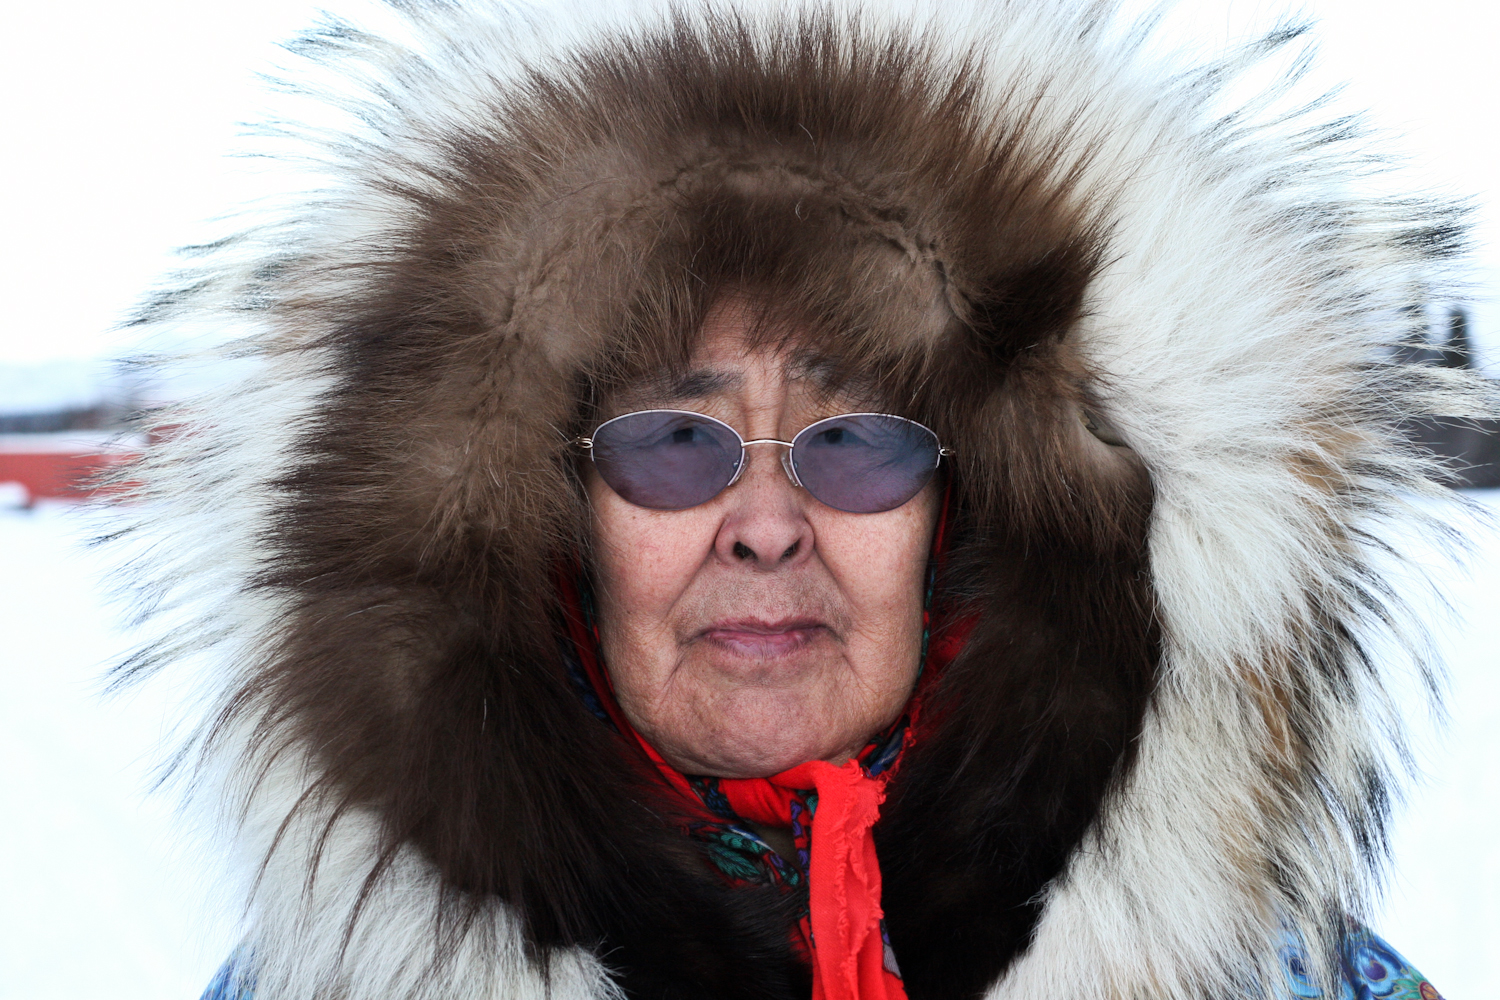   Irene Armstrong, village preacher and pioneer for tradition in Ambler, Alaska.  